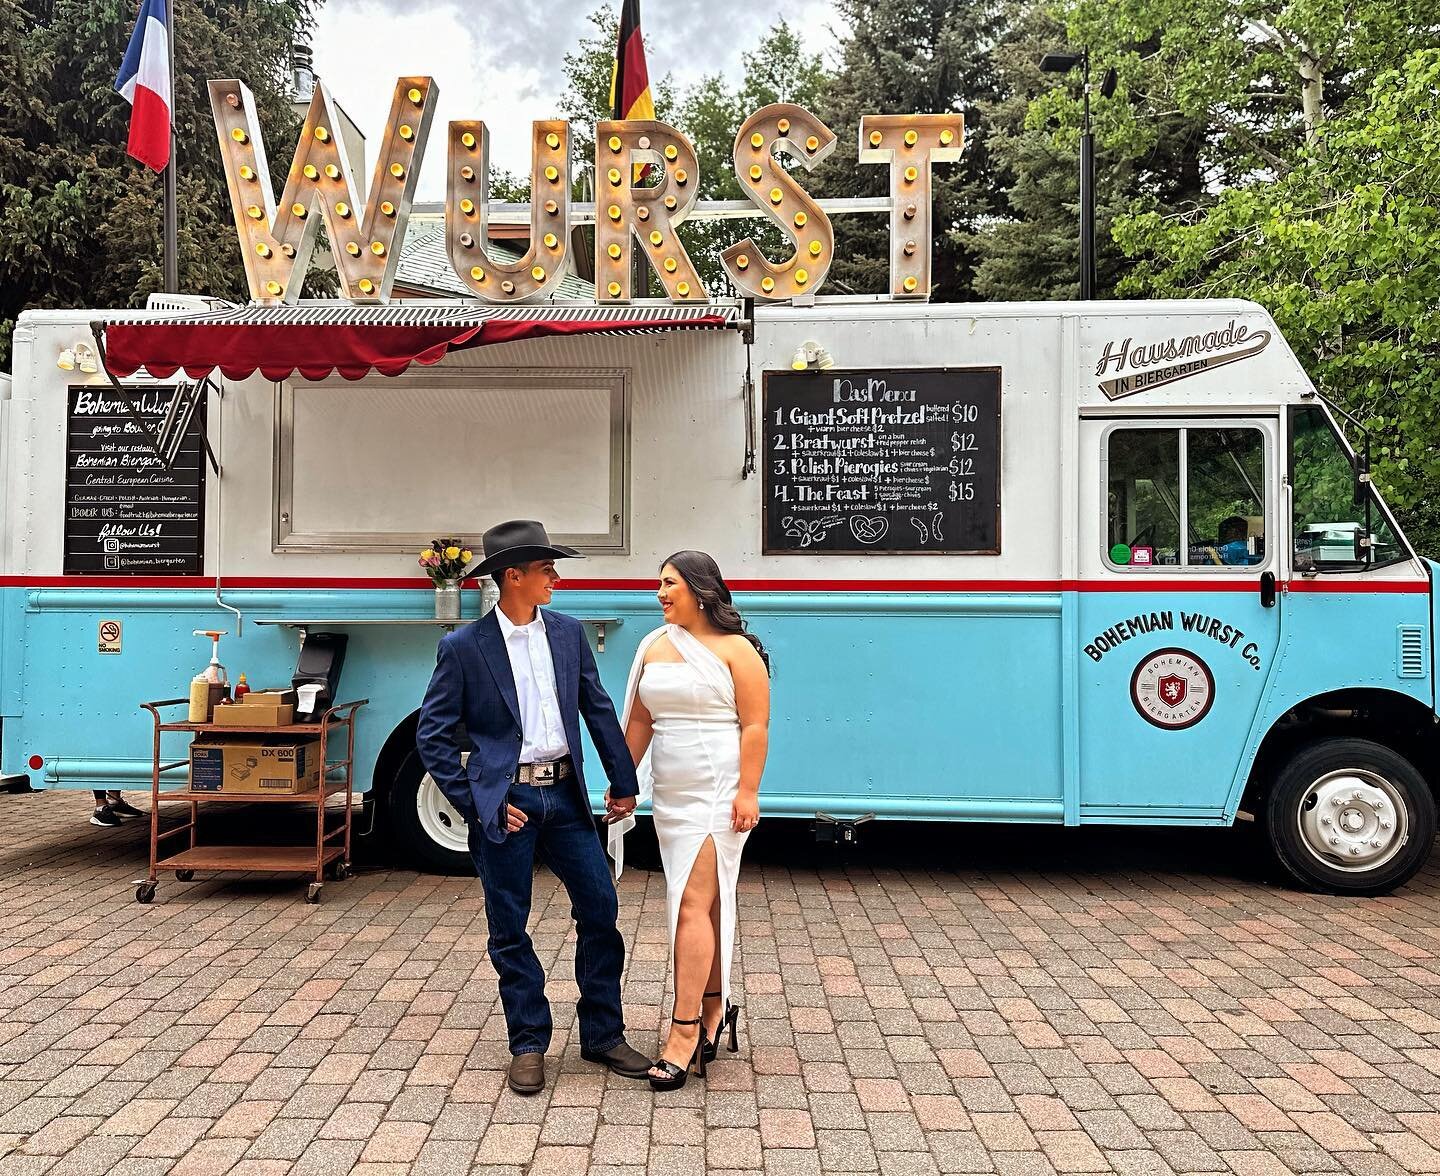 Love is in the air❤️🥰🌭🥨. #foodislove #loveandmarriage #vail